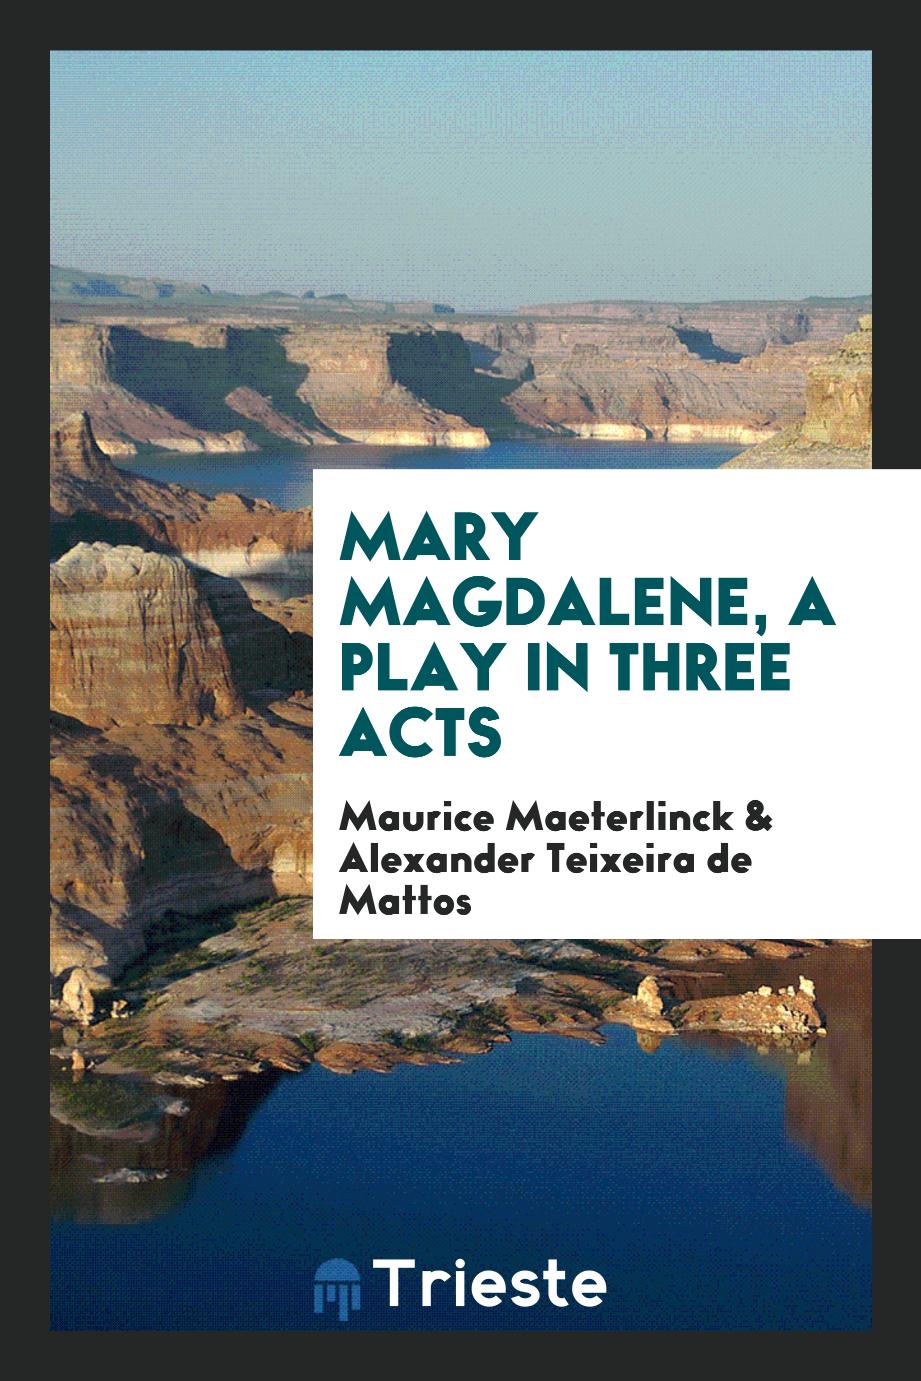 Mary Magdalene, a play in three acts